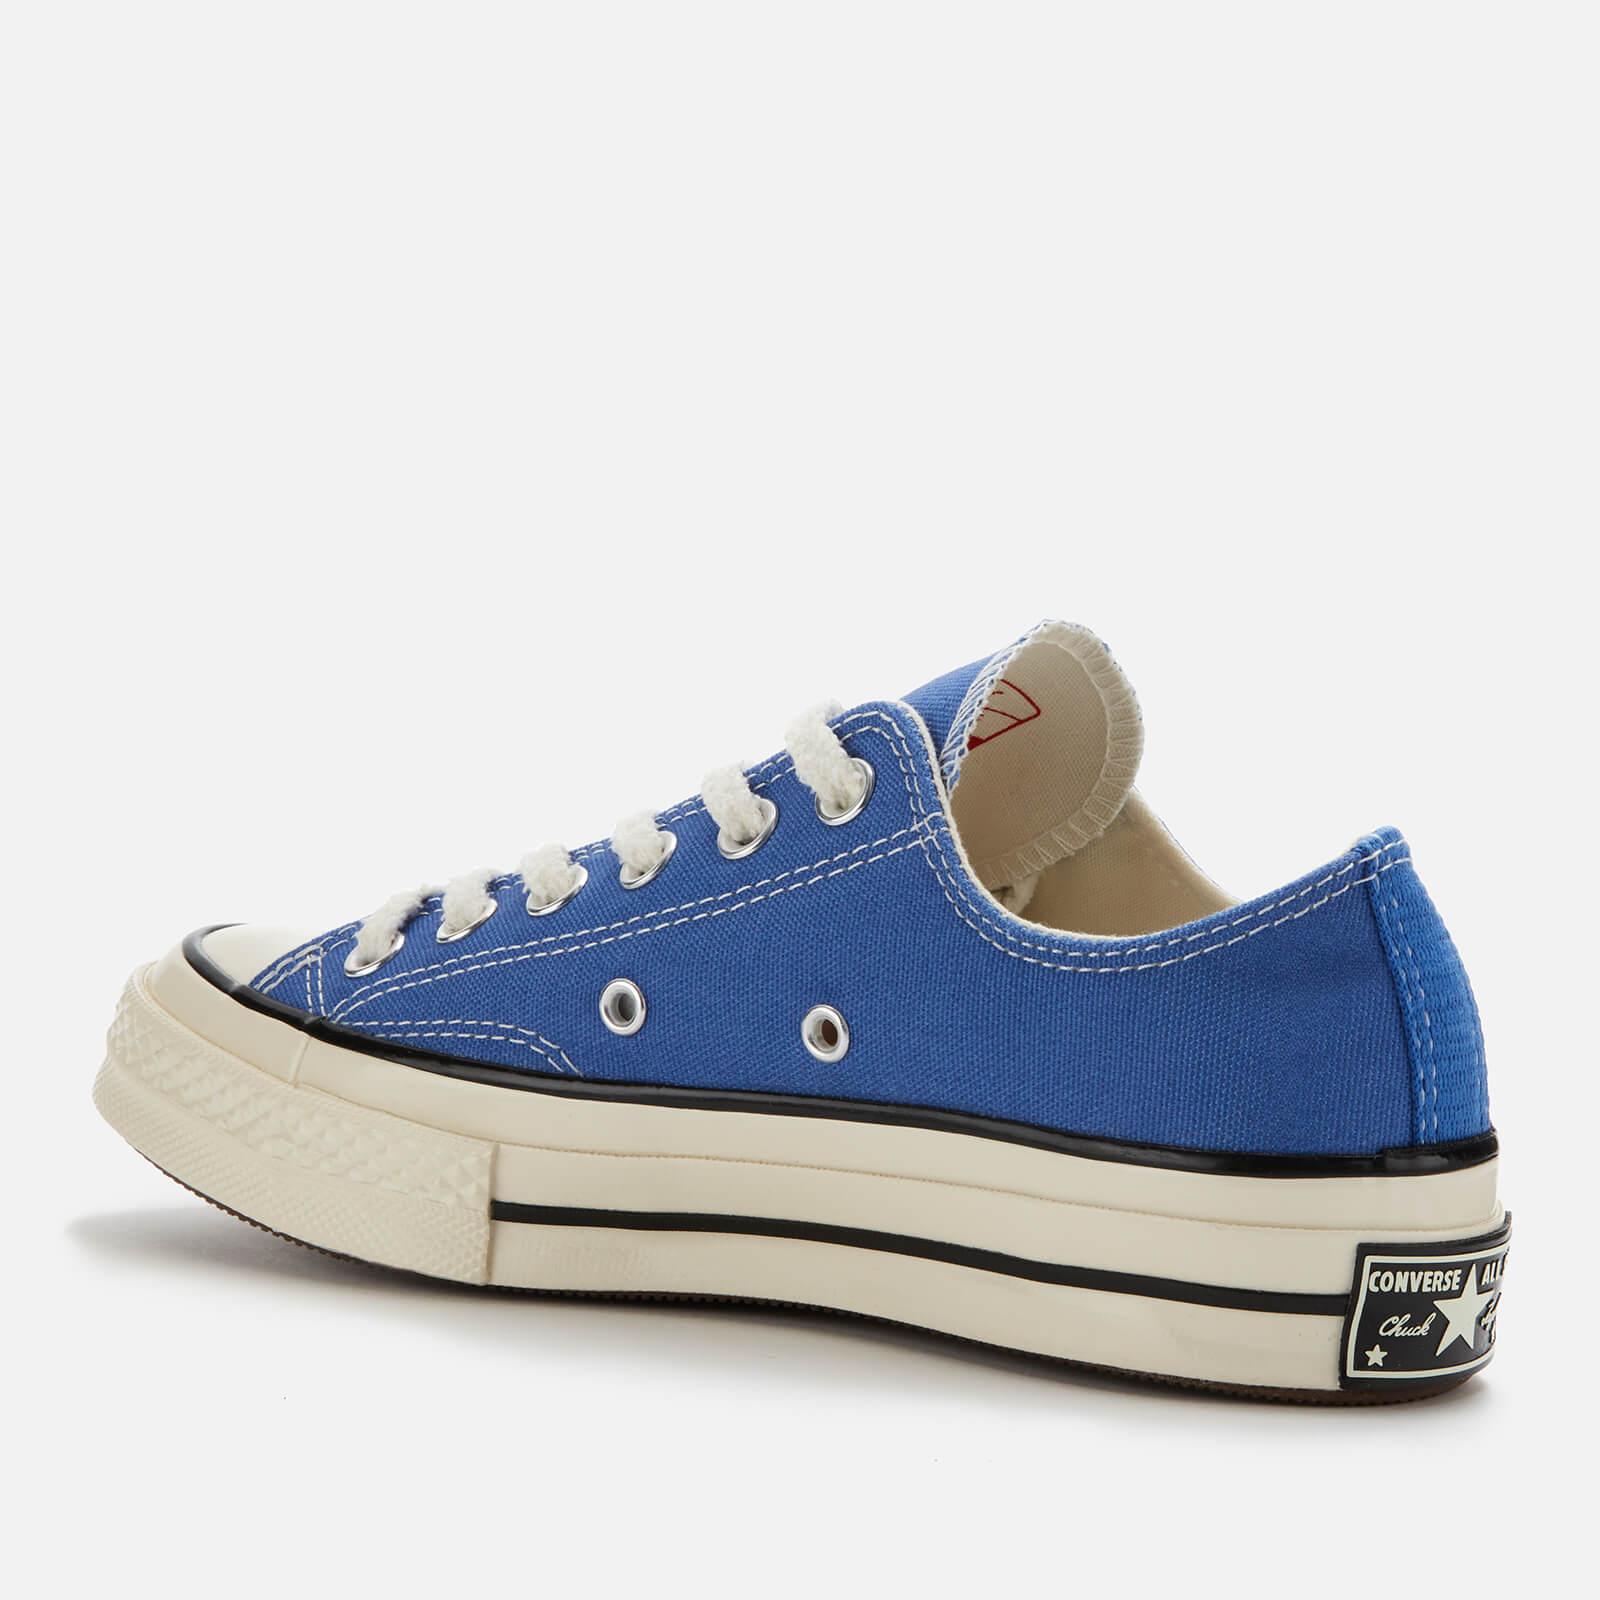 Converse Chuck Taylor All Star '70 Ox Trainers in Blue - Lyst